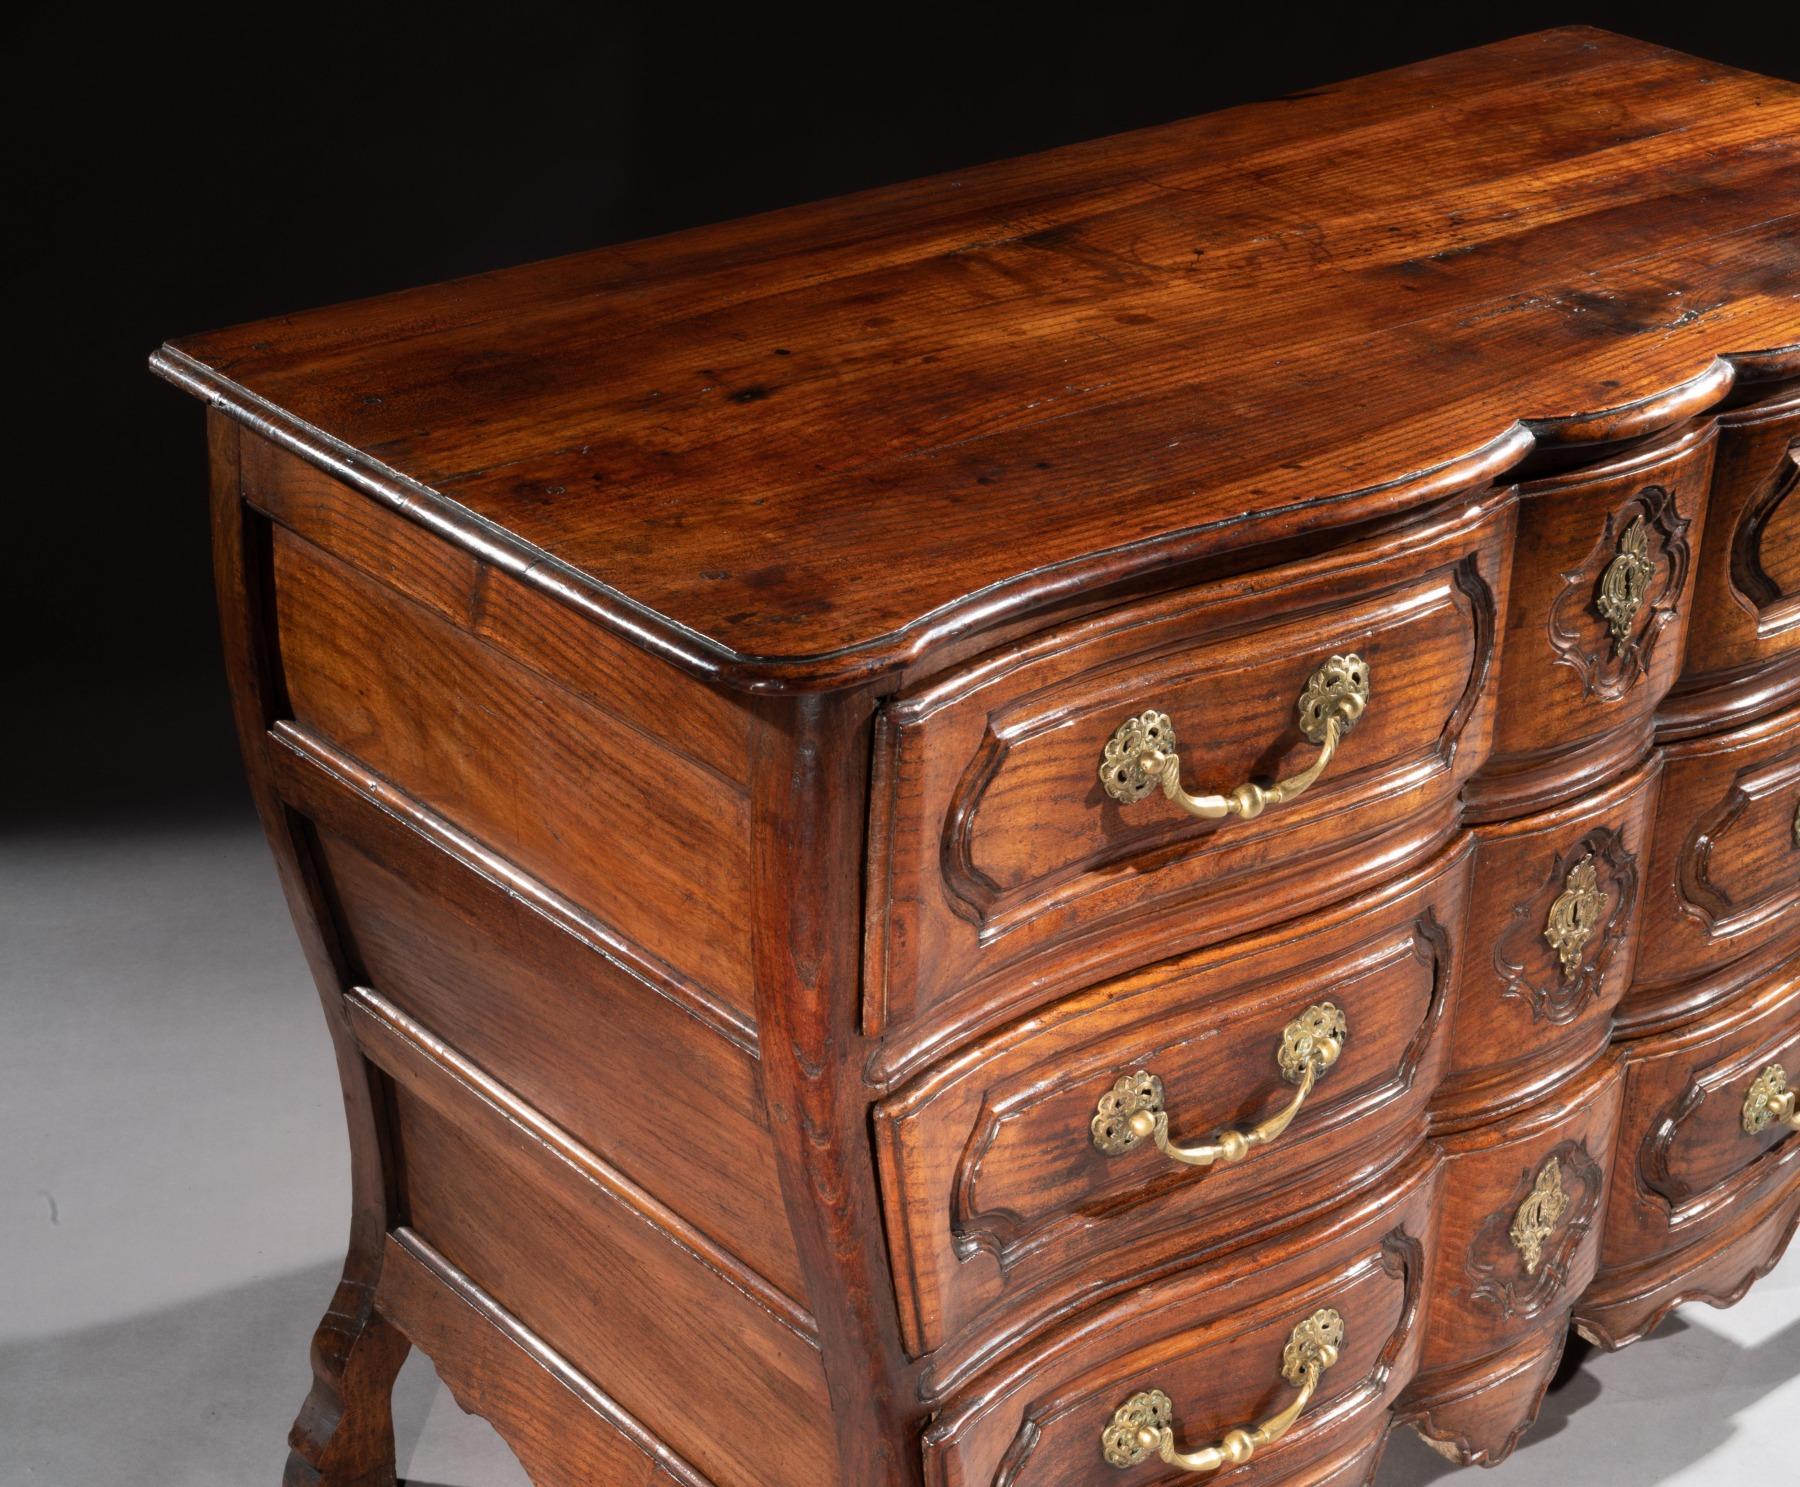 Mid-18th Century Louis XV Bombe Shaped Chestnut Provincial Commode In Good Condition For Sale In Benington, Herts